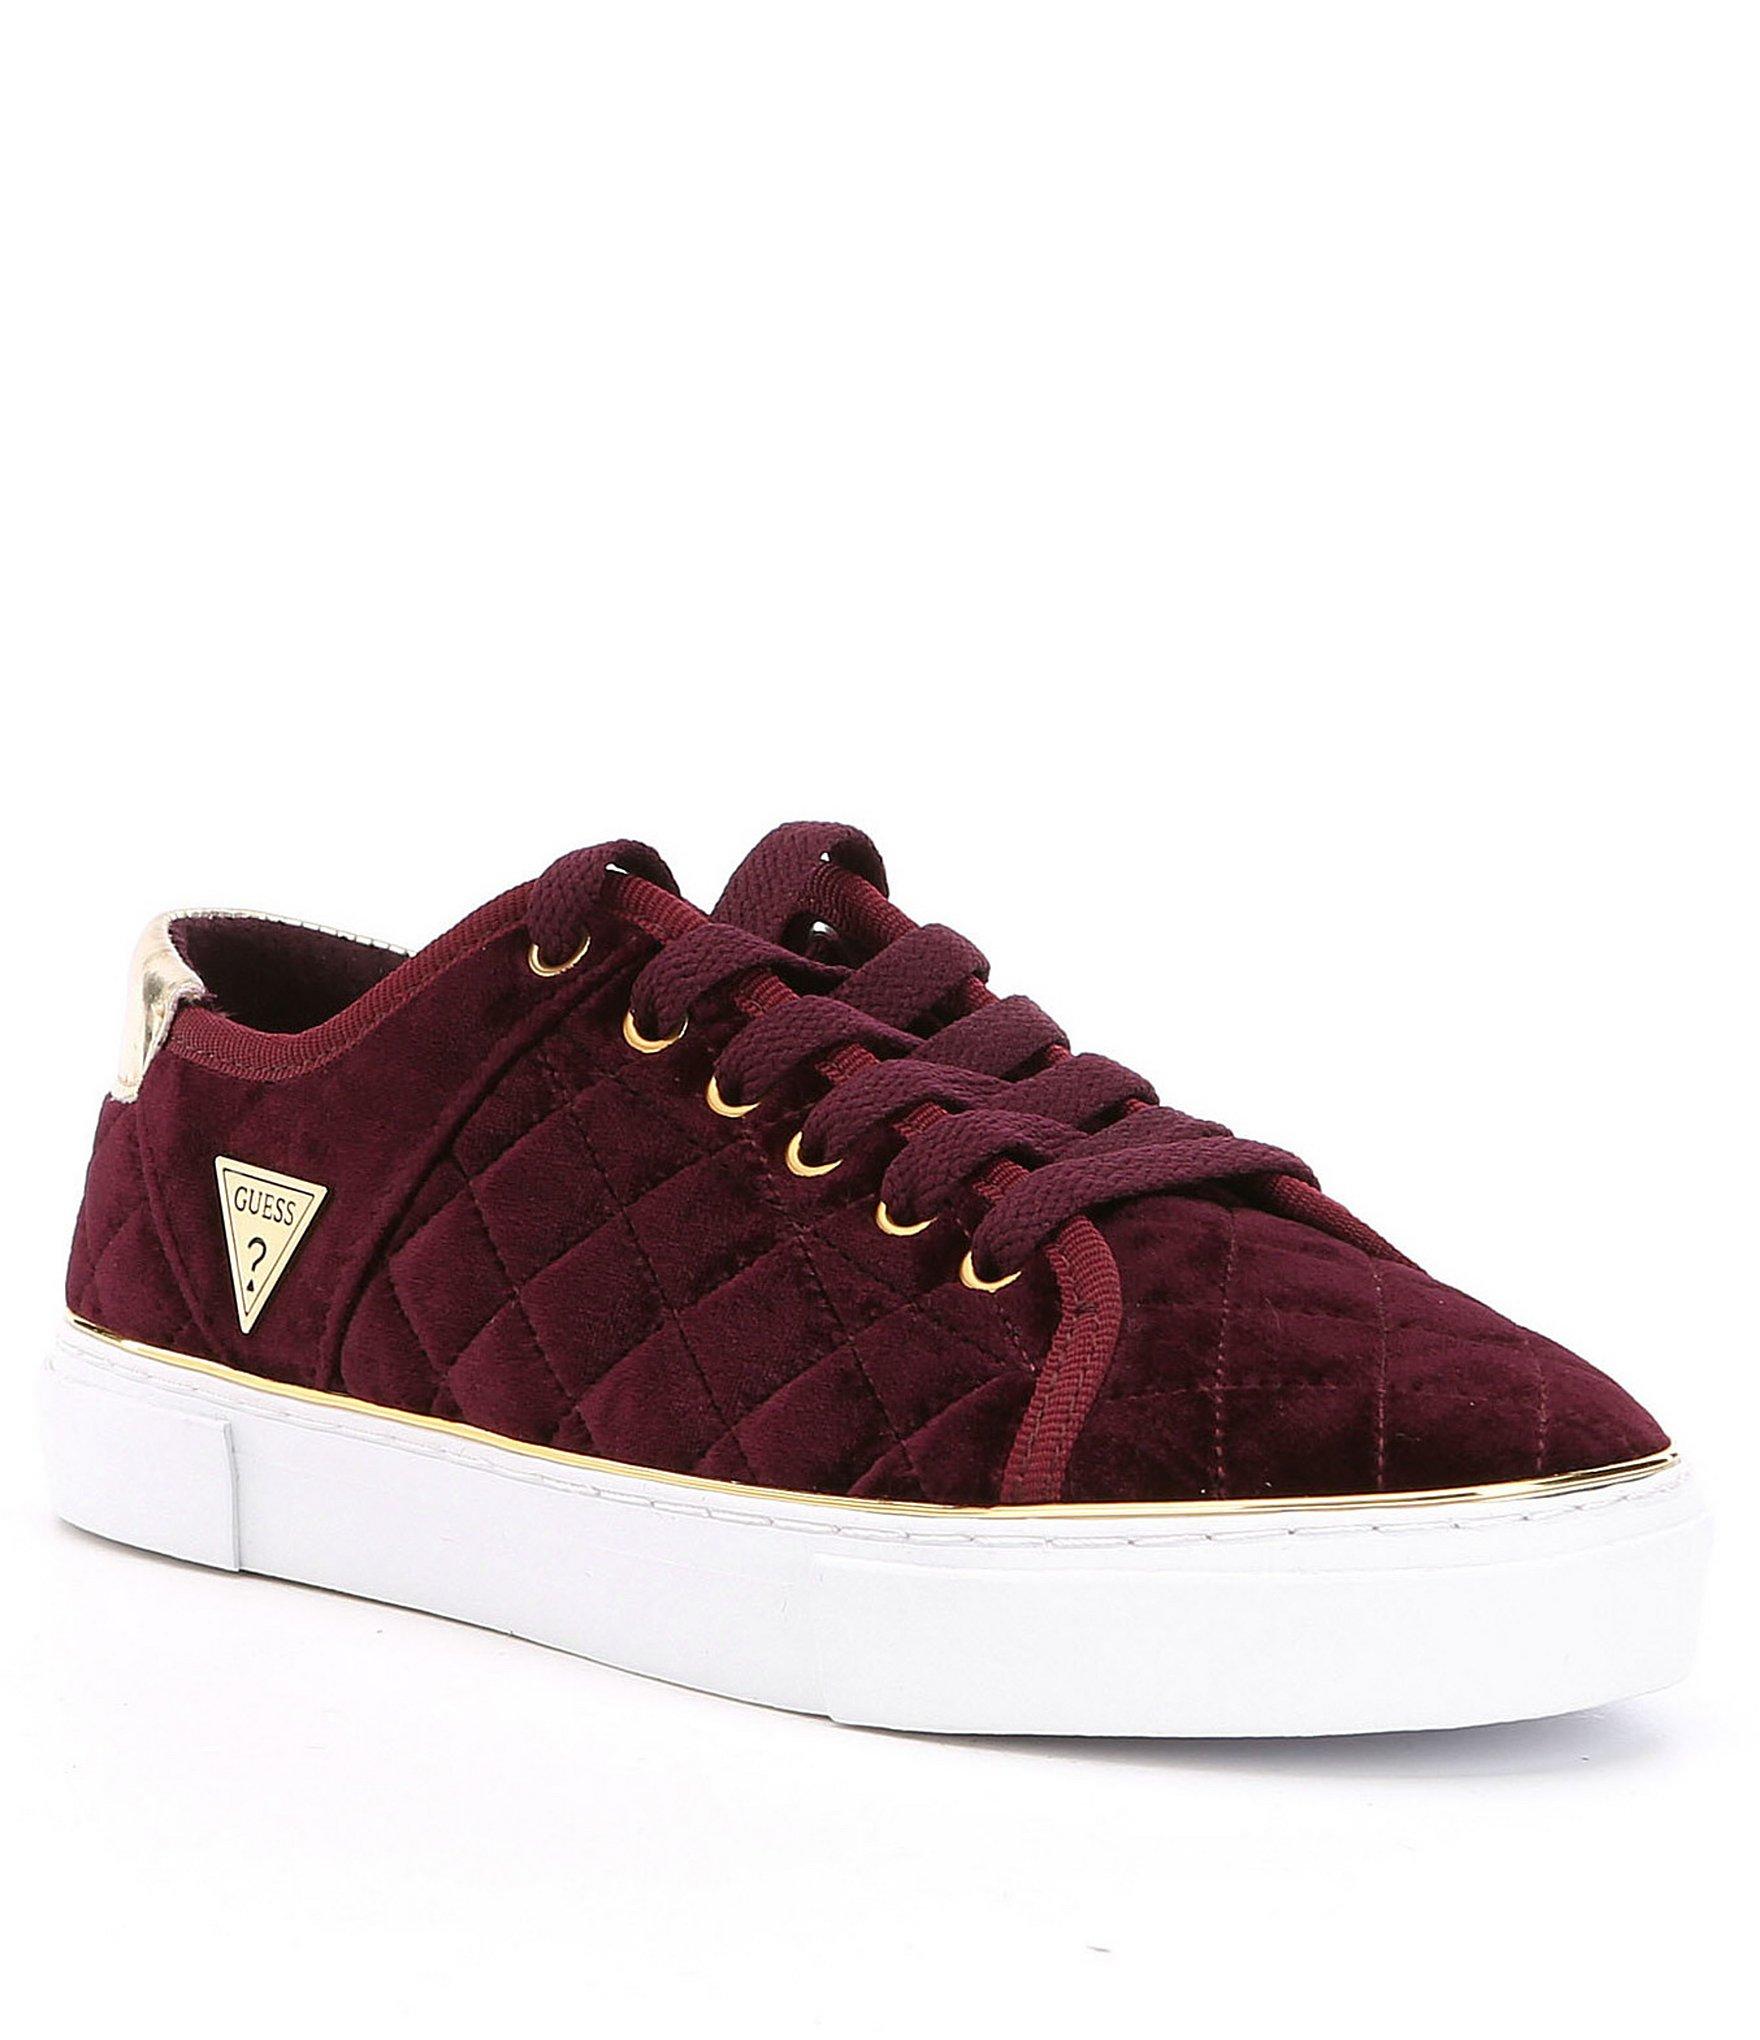 Lyst - Guess Goodone2 Quilted Velvet Sneakers in Red for Men